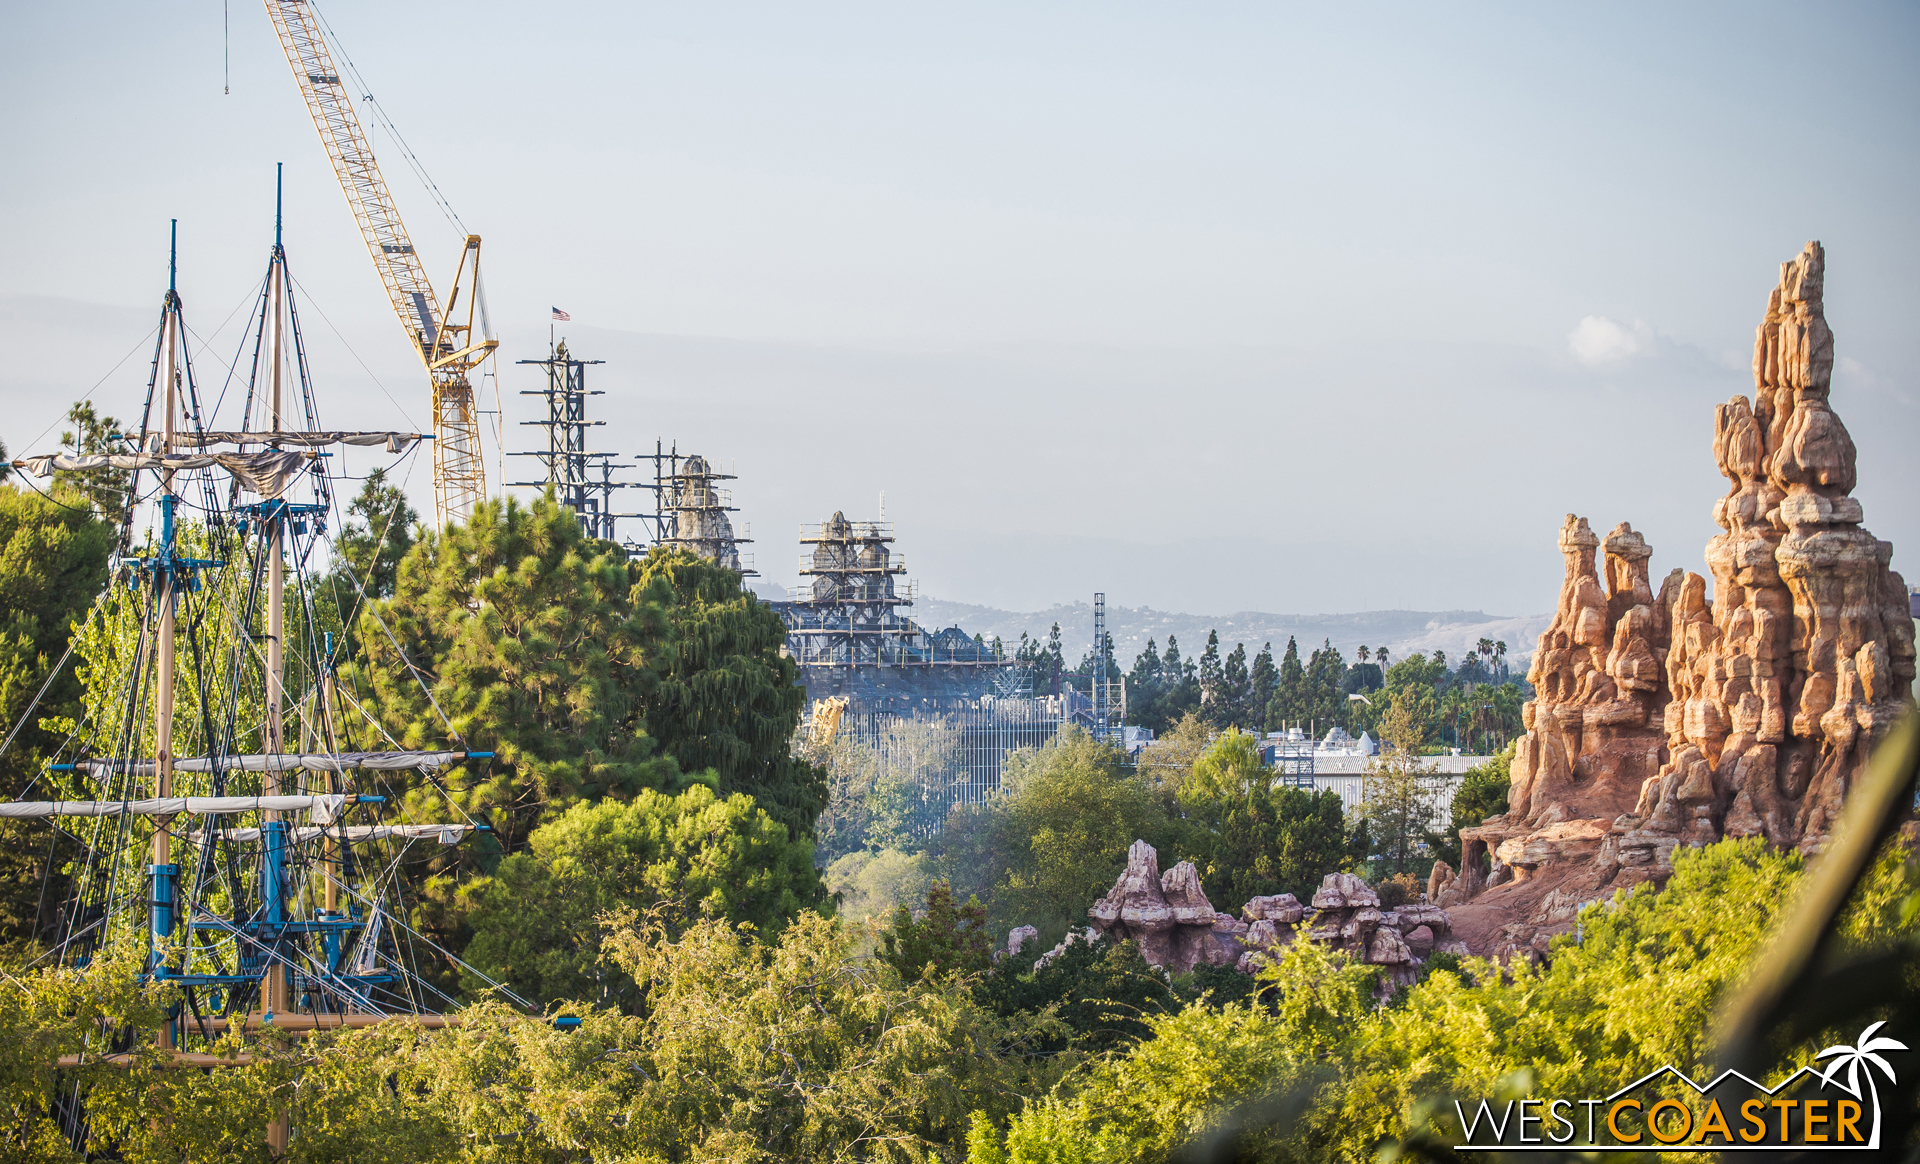  From certain parts of the park, the mountains are visible across the skyline. 